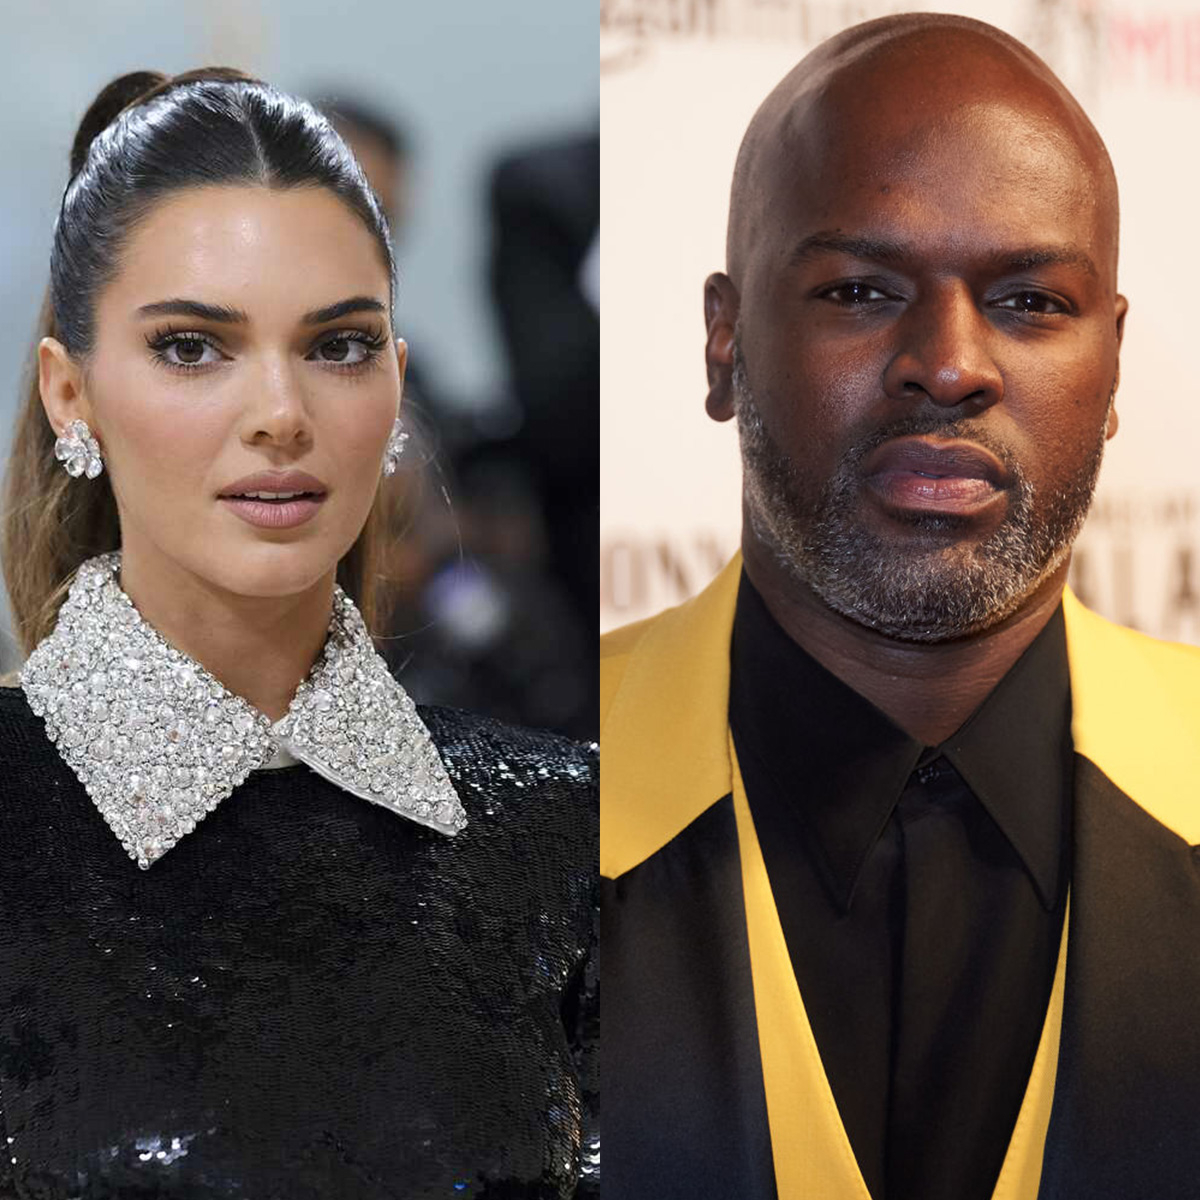 Kendall Jenner Explains What Led to Corey Gamble Feud